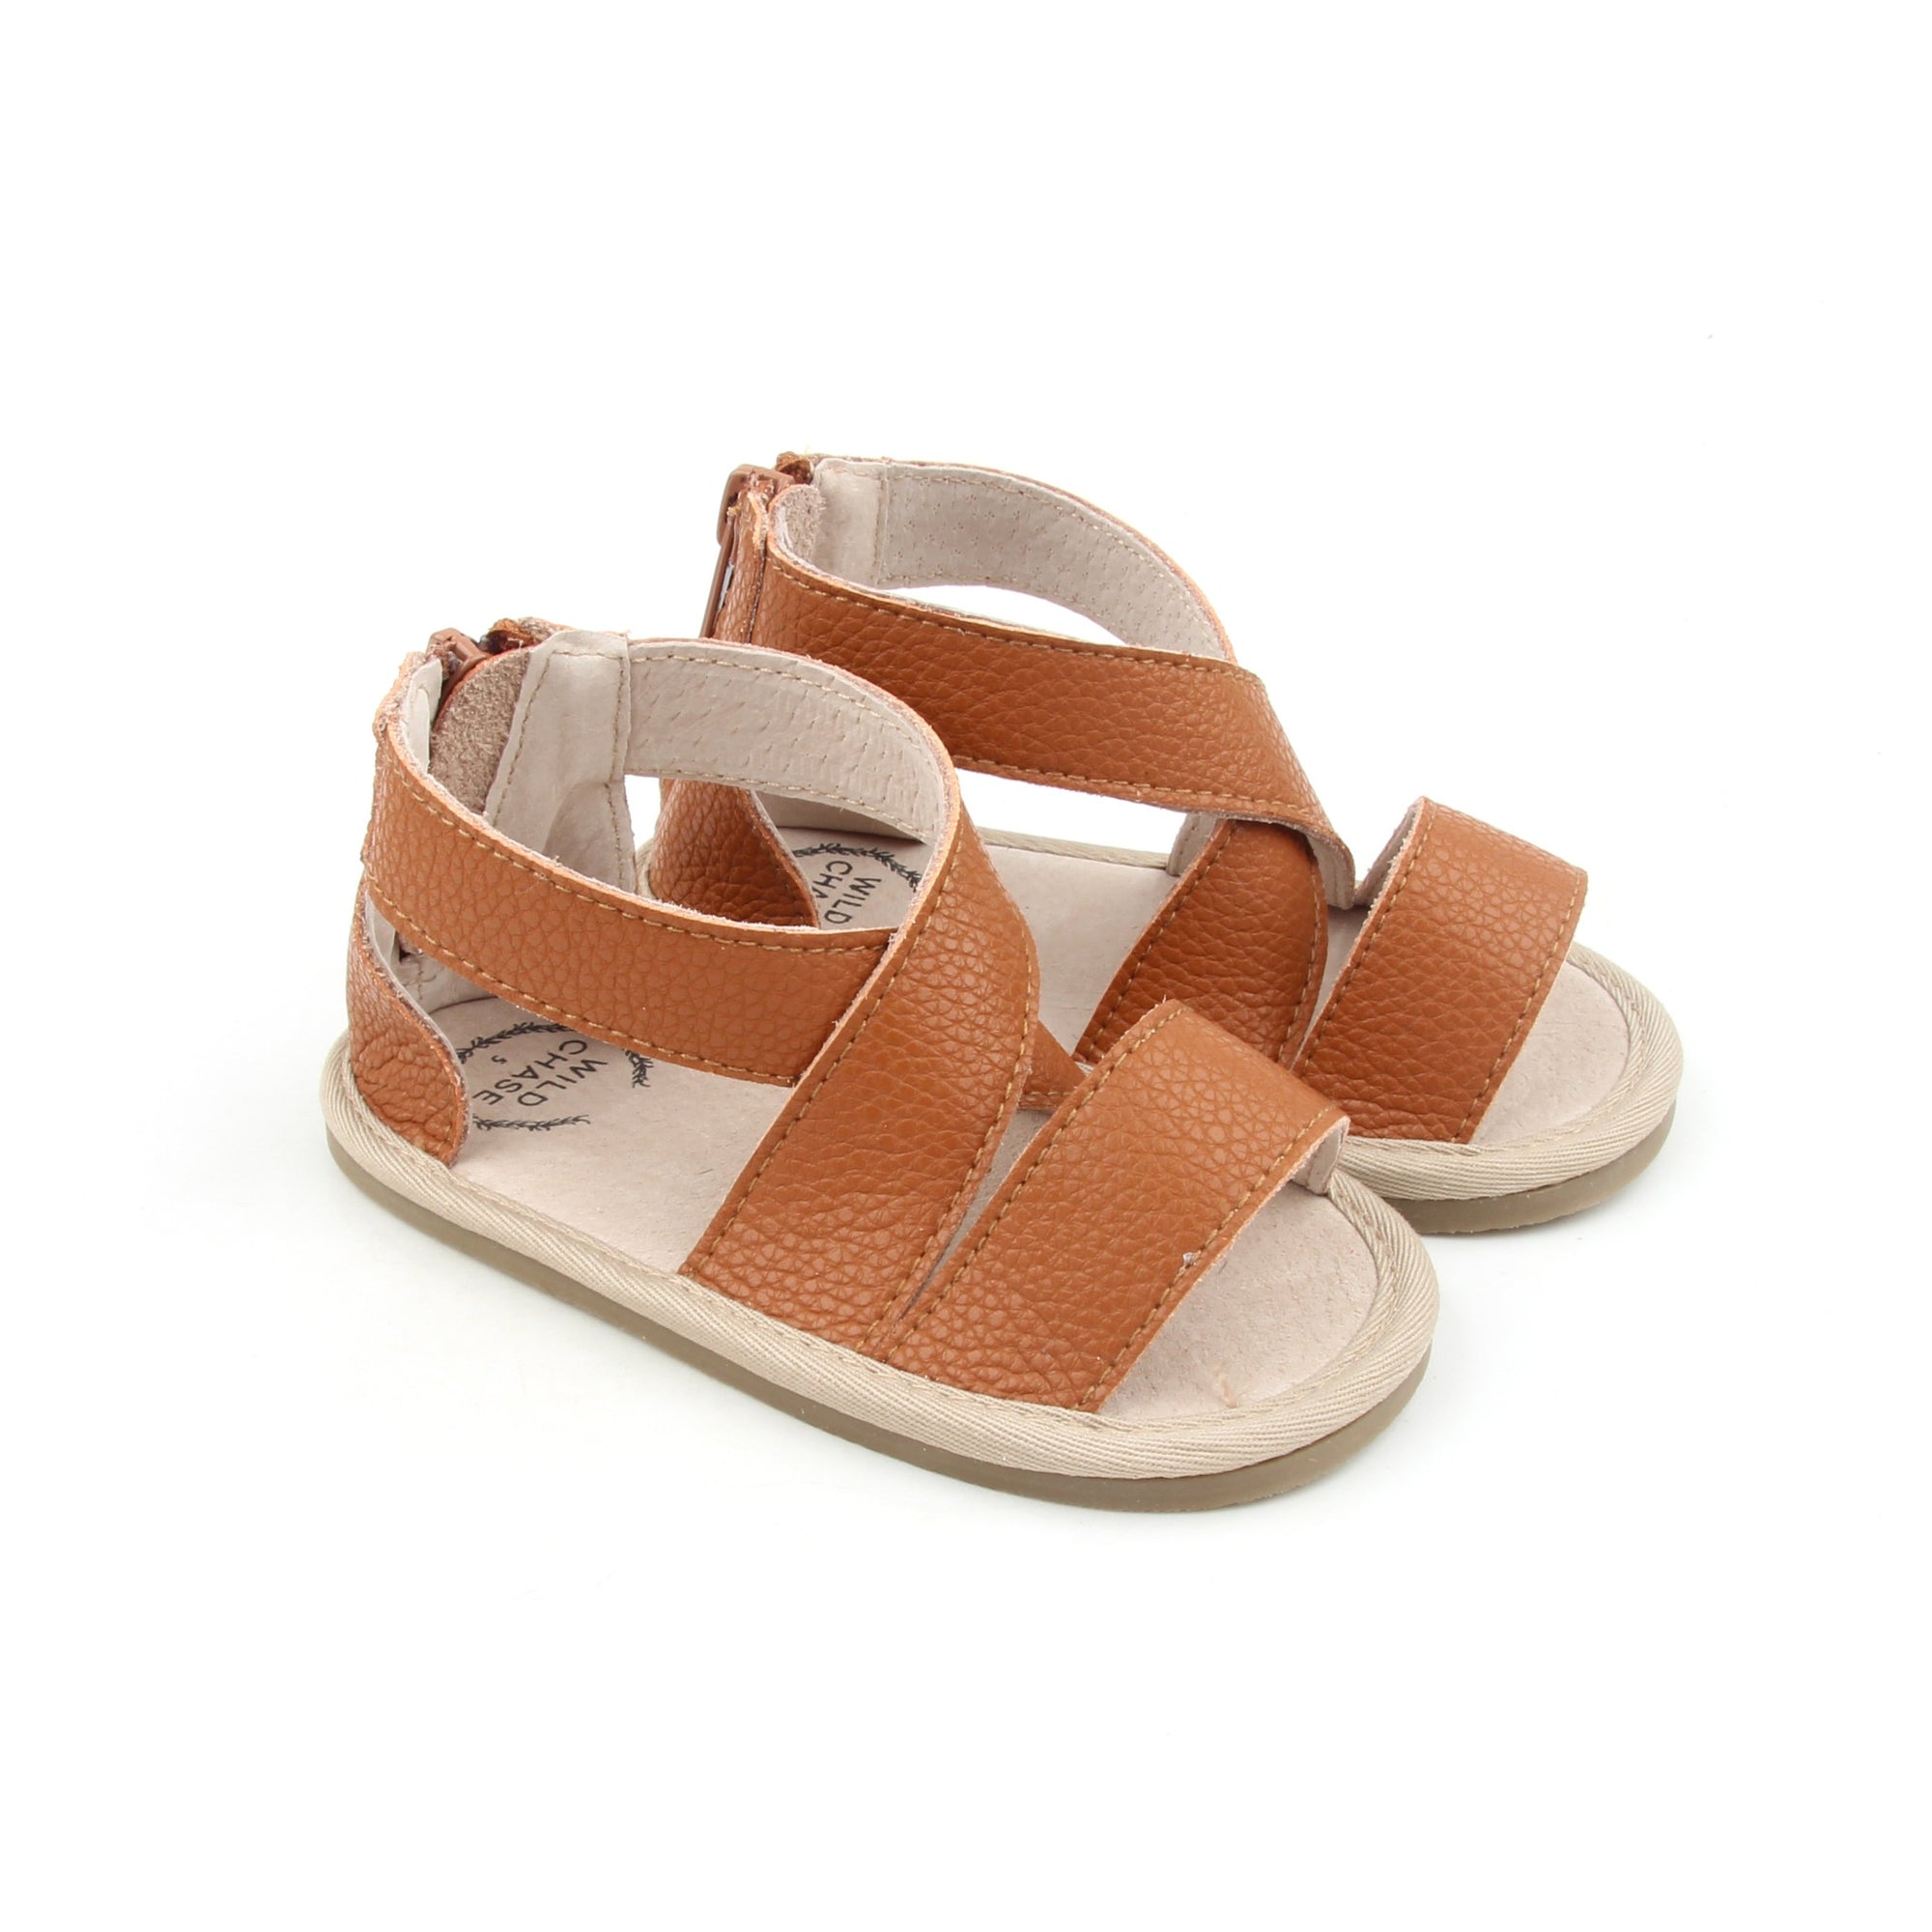 Wildchase - Luxe Leather Girls Sandals - Tan